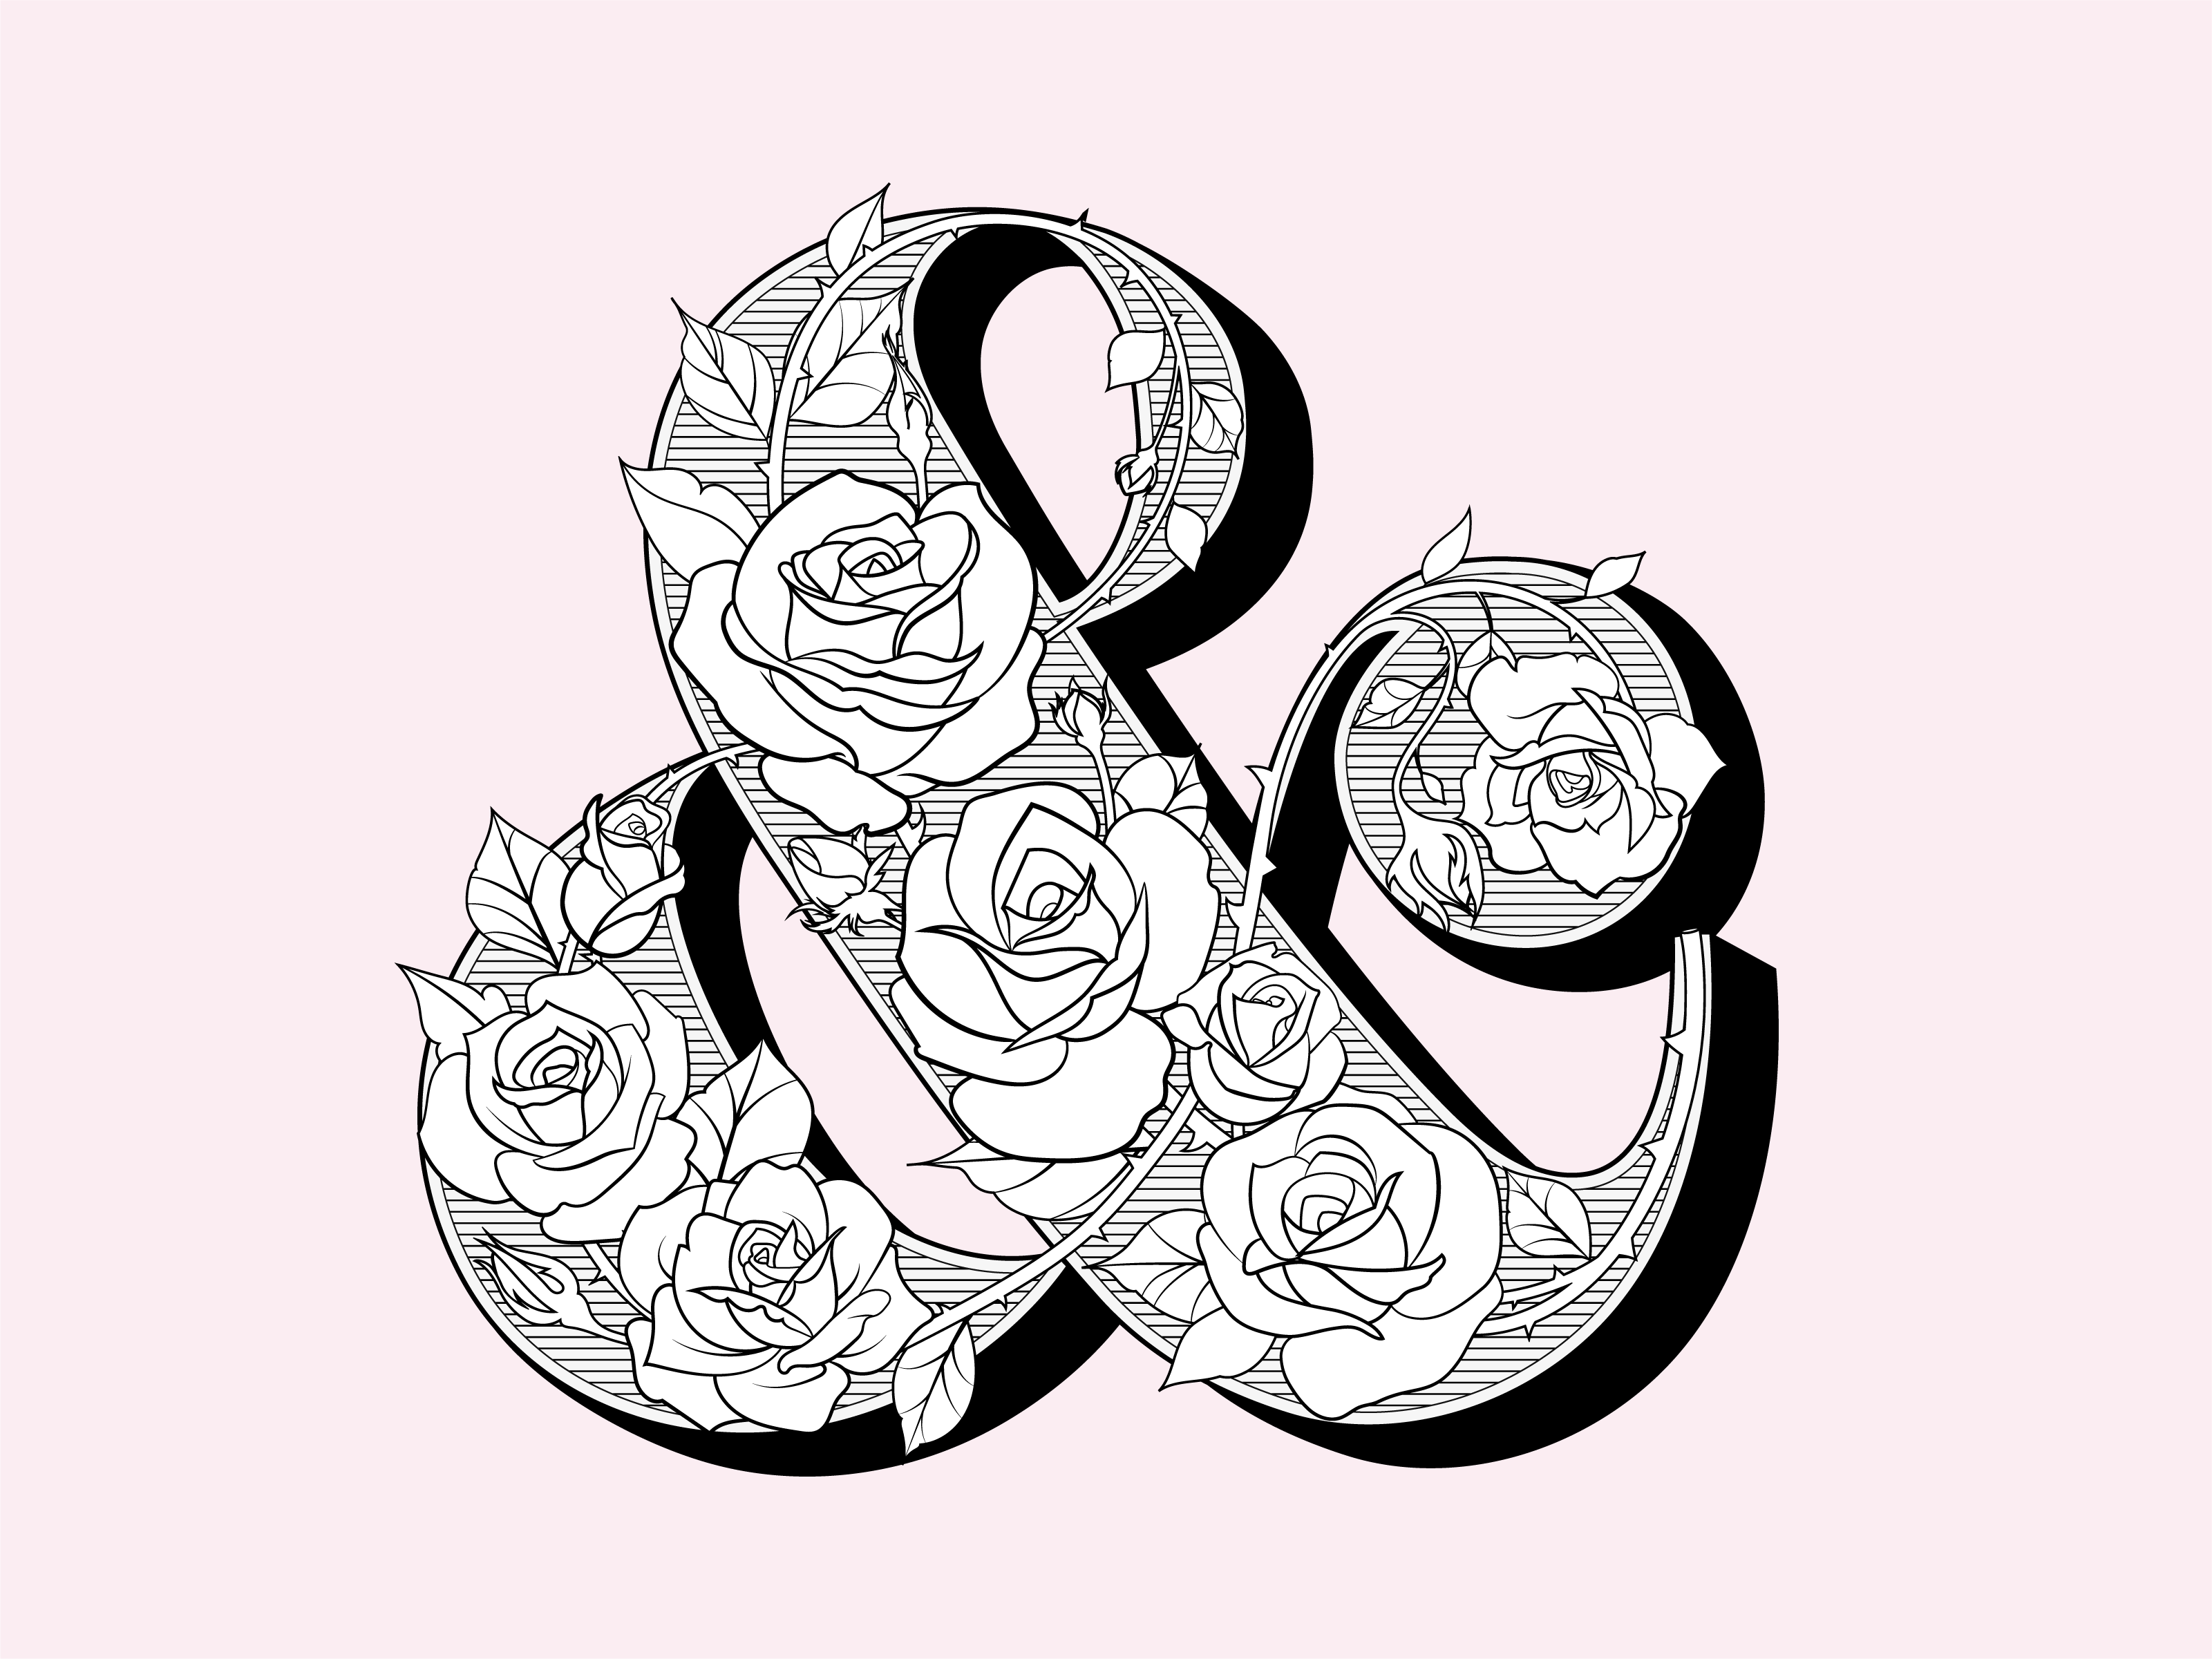 This is the floral ampersand I created.